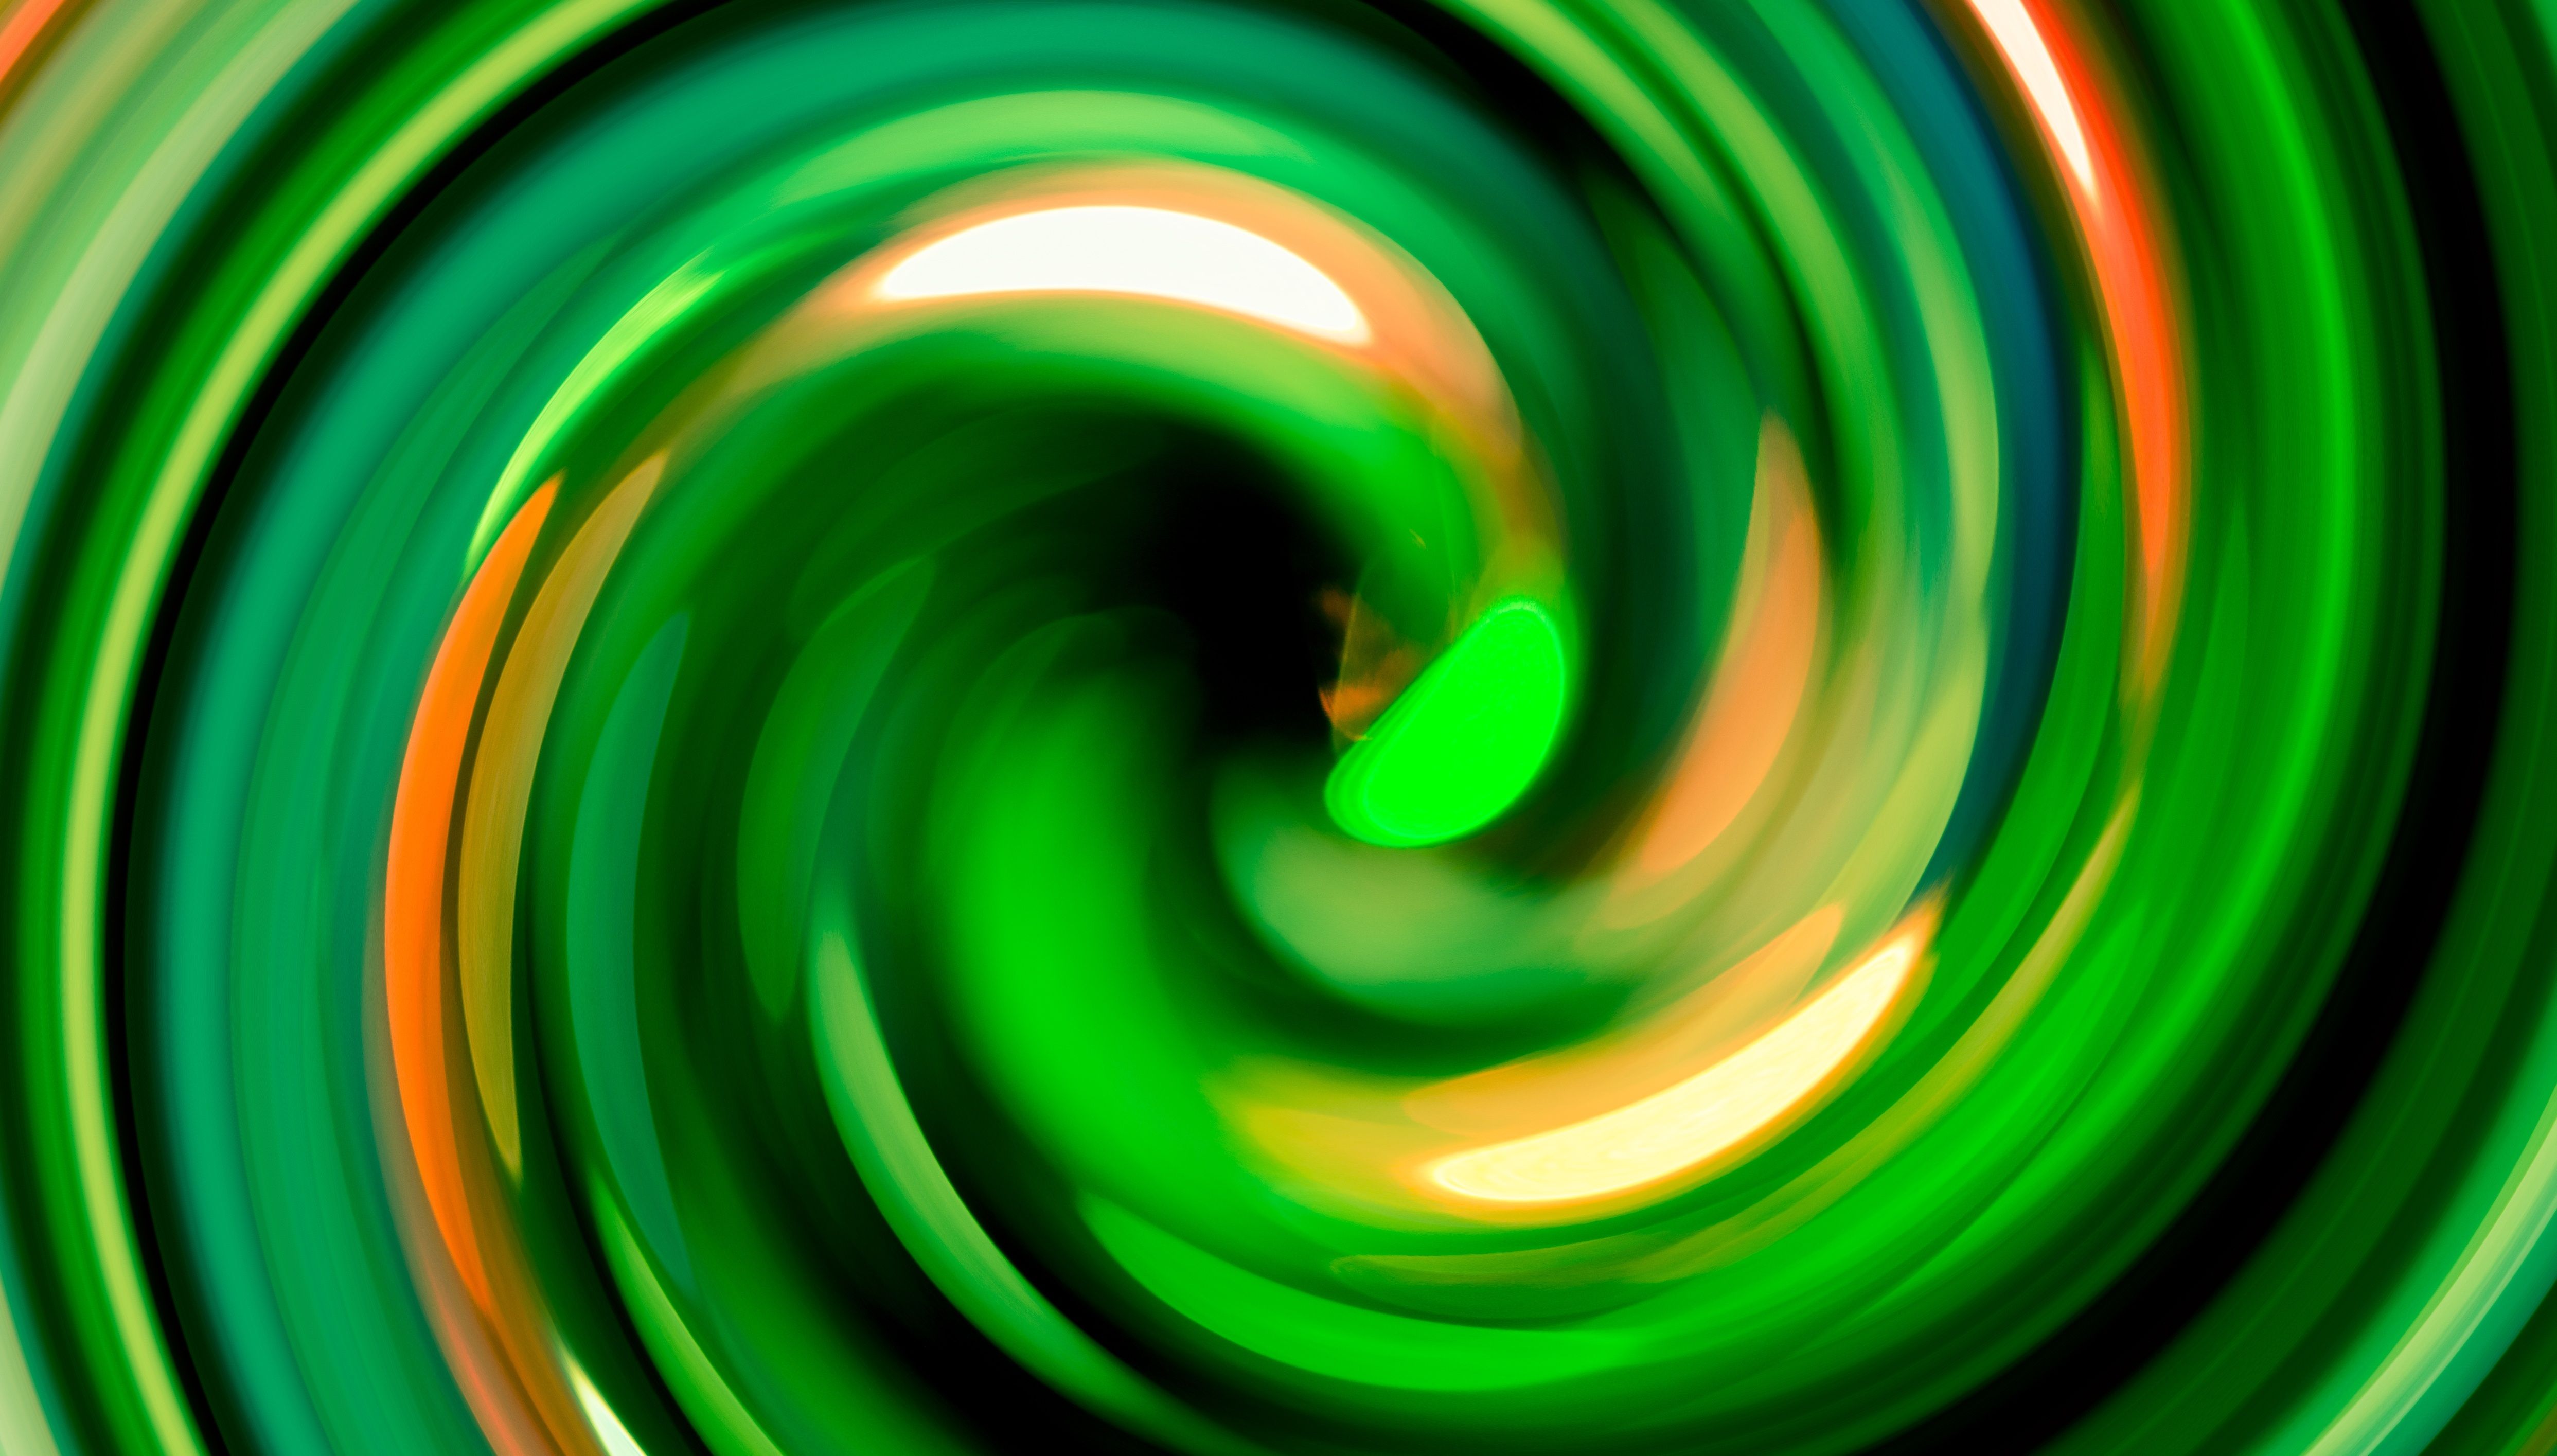 Abstract Spiral Spin Wallpaper, HD Abstract 4K Wallpaper, Image, Photo and Background